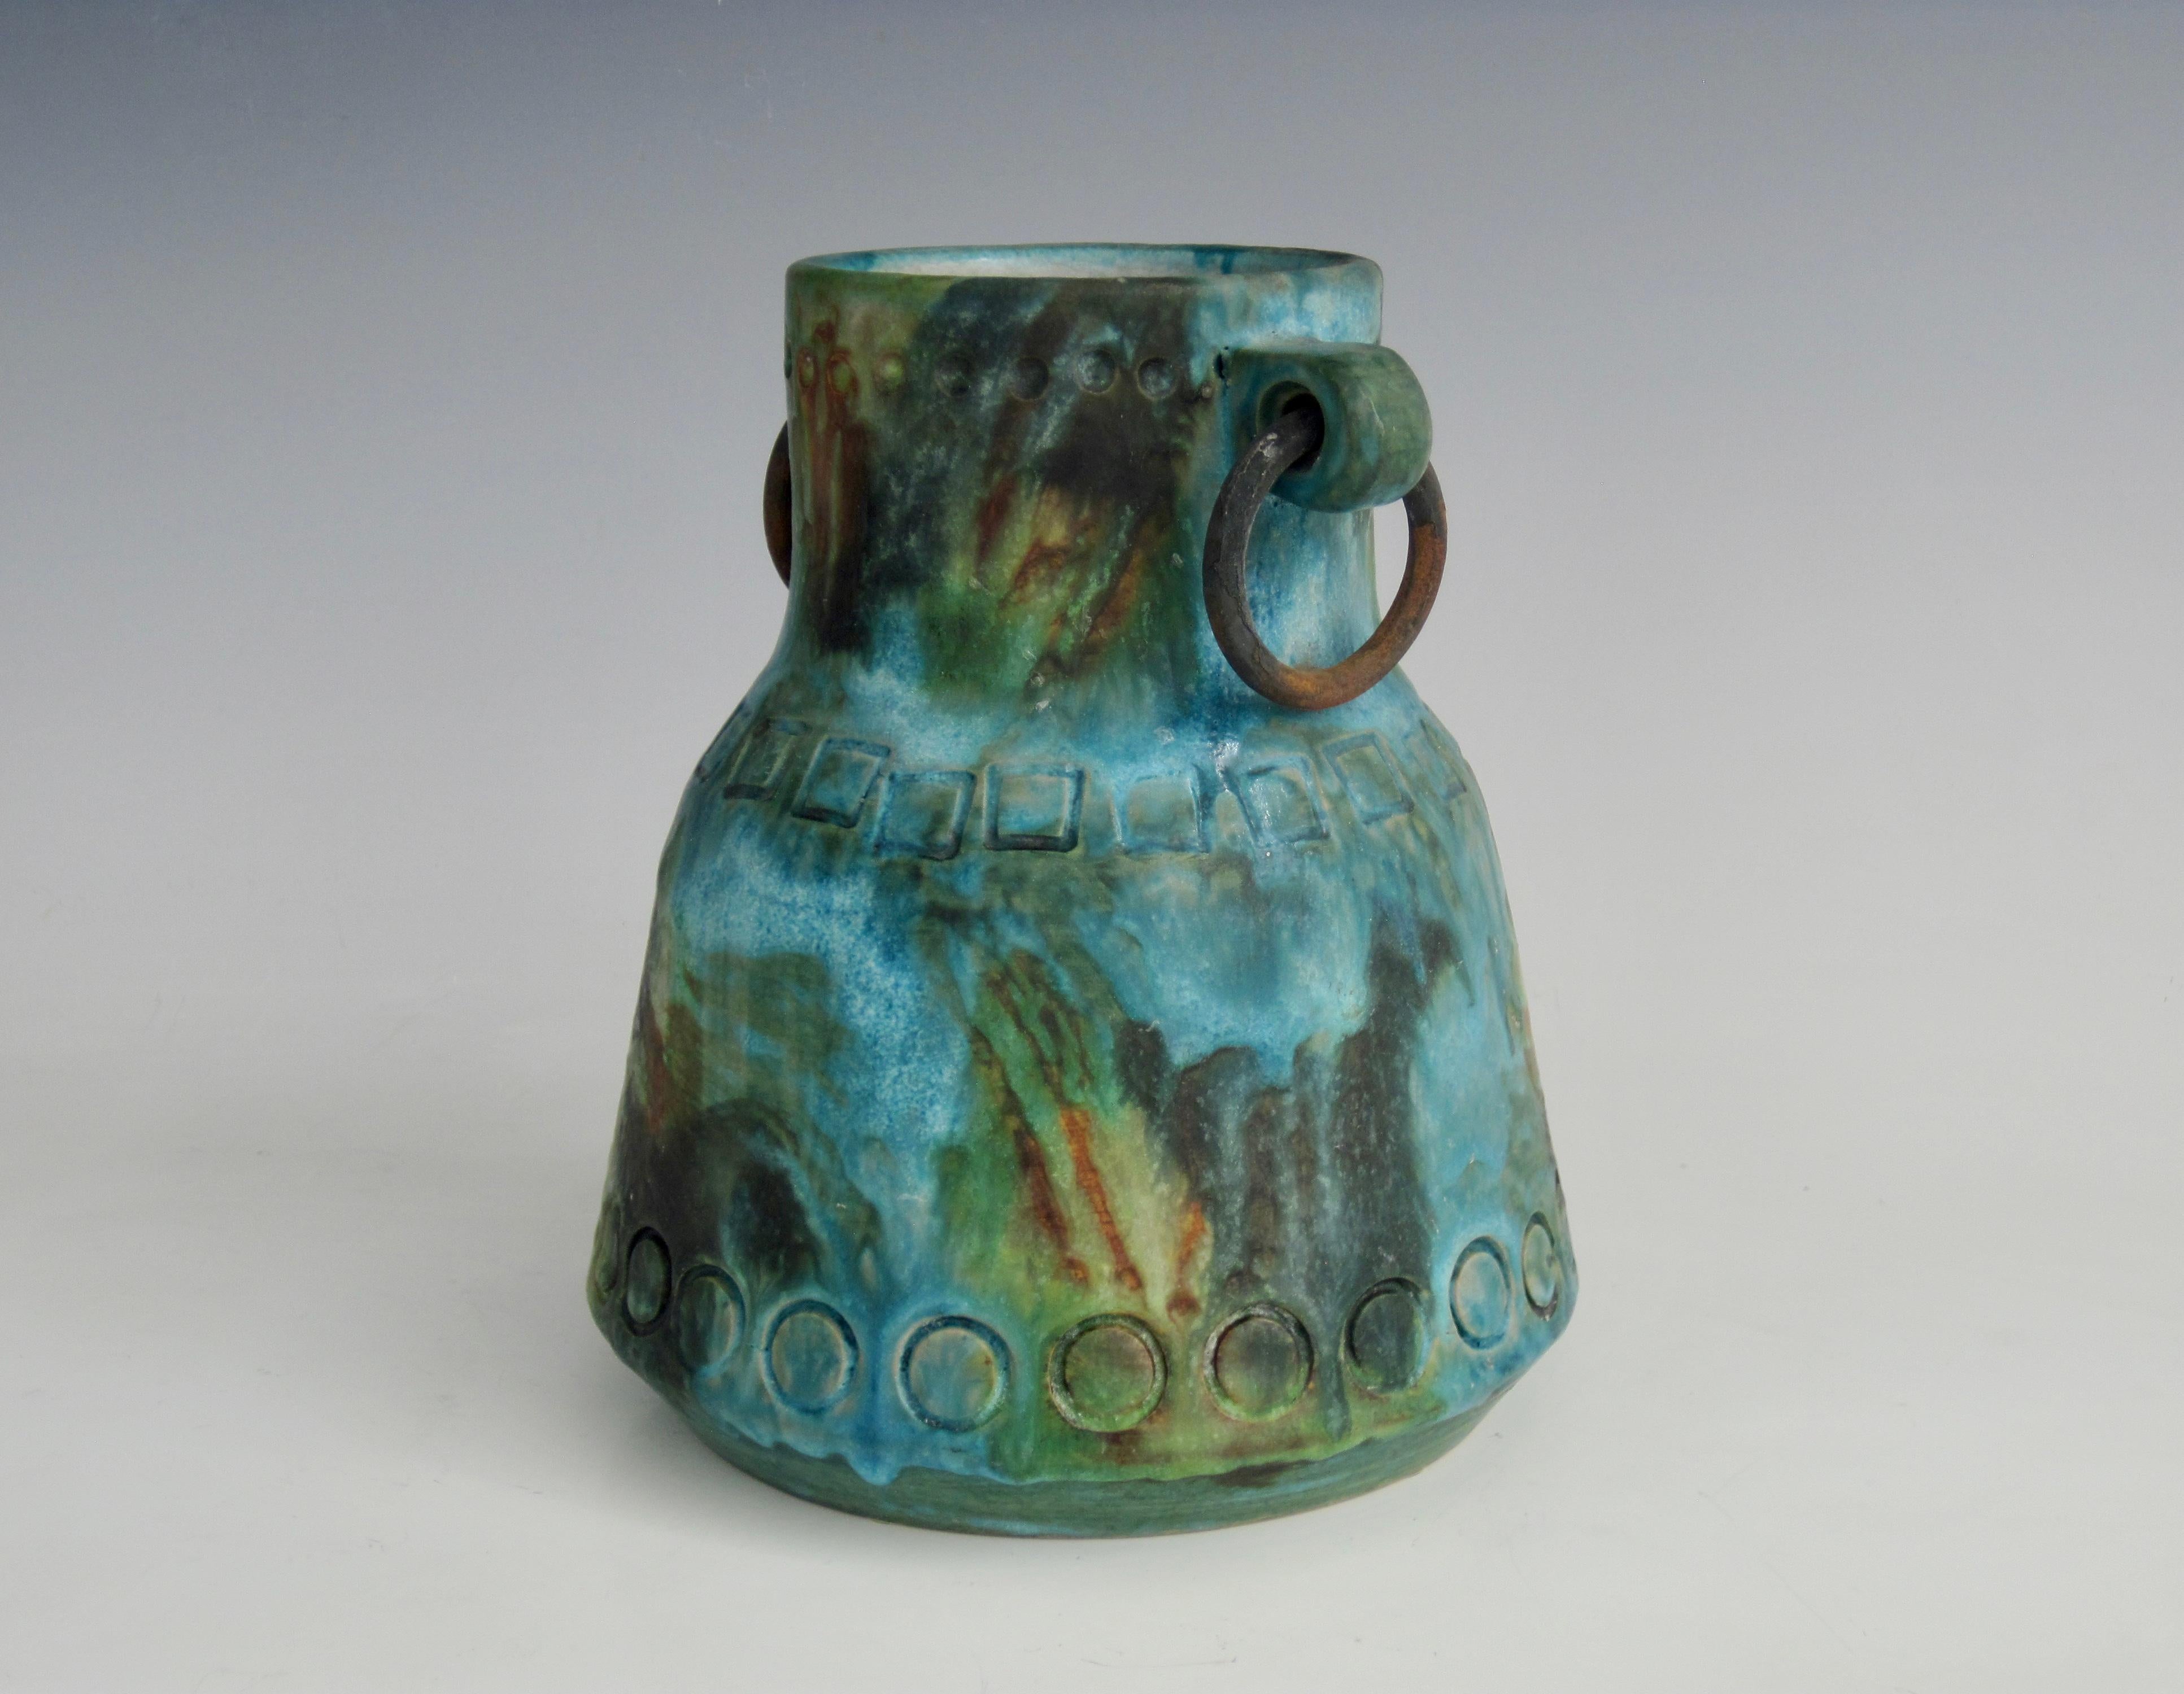 Alvino Bagni 's (1919-2000) handled vessel with brass rings from his Sea Garden Series. This series made up of turquoise, blue, green, yellow, brown, and black often had surface impressions such as the circles and squares at the top, middle and near